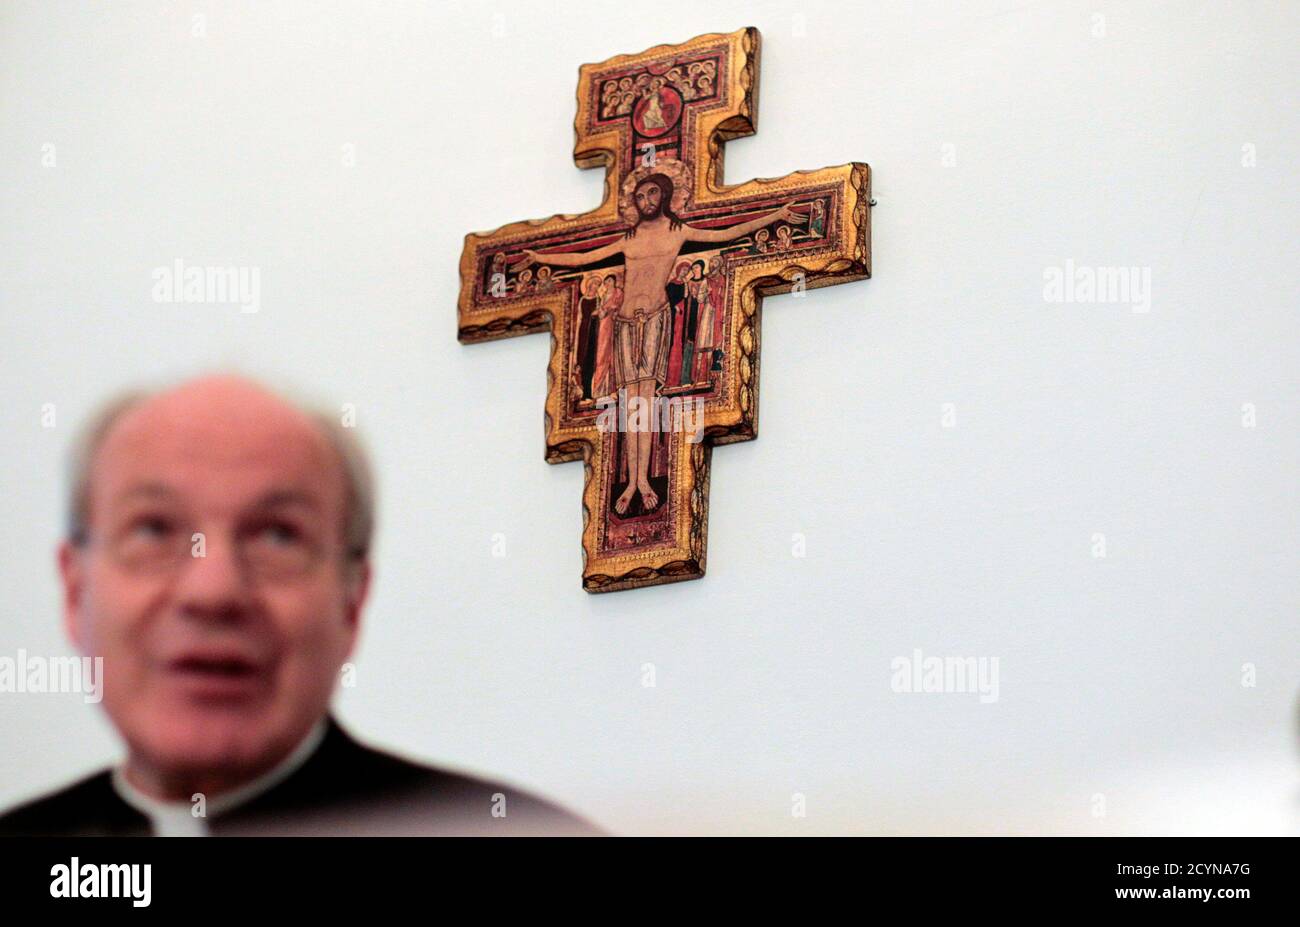 Cardinal Christoph Schoenborn, Archbishop of Vienna, reacts as he briefs the media during a news conference in Vienna November 9, 2012.   REUTERS/Herwig Prammer  (AUSTRIA - Tags: POLITICS RELIGION) Stock Photo